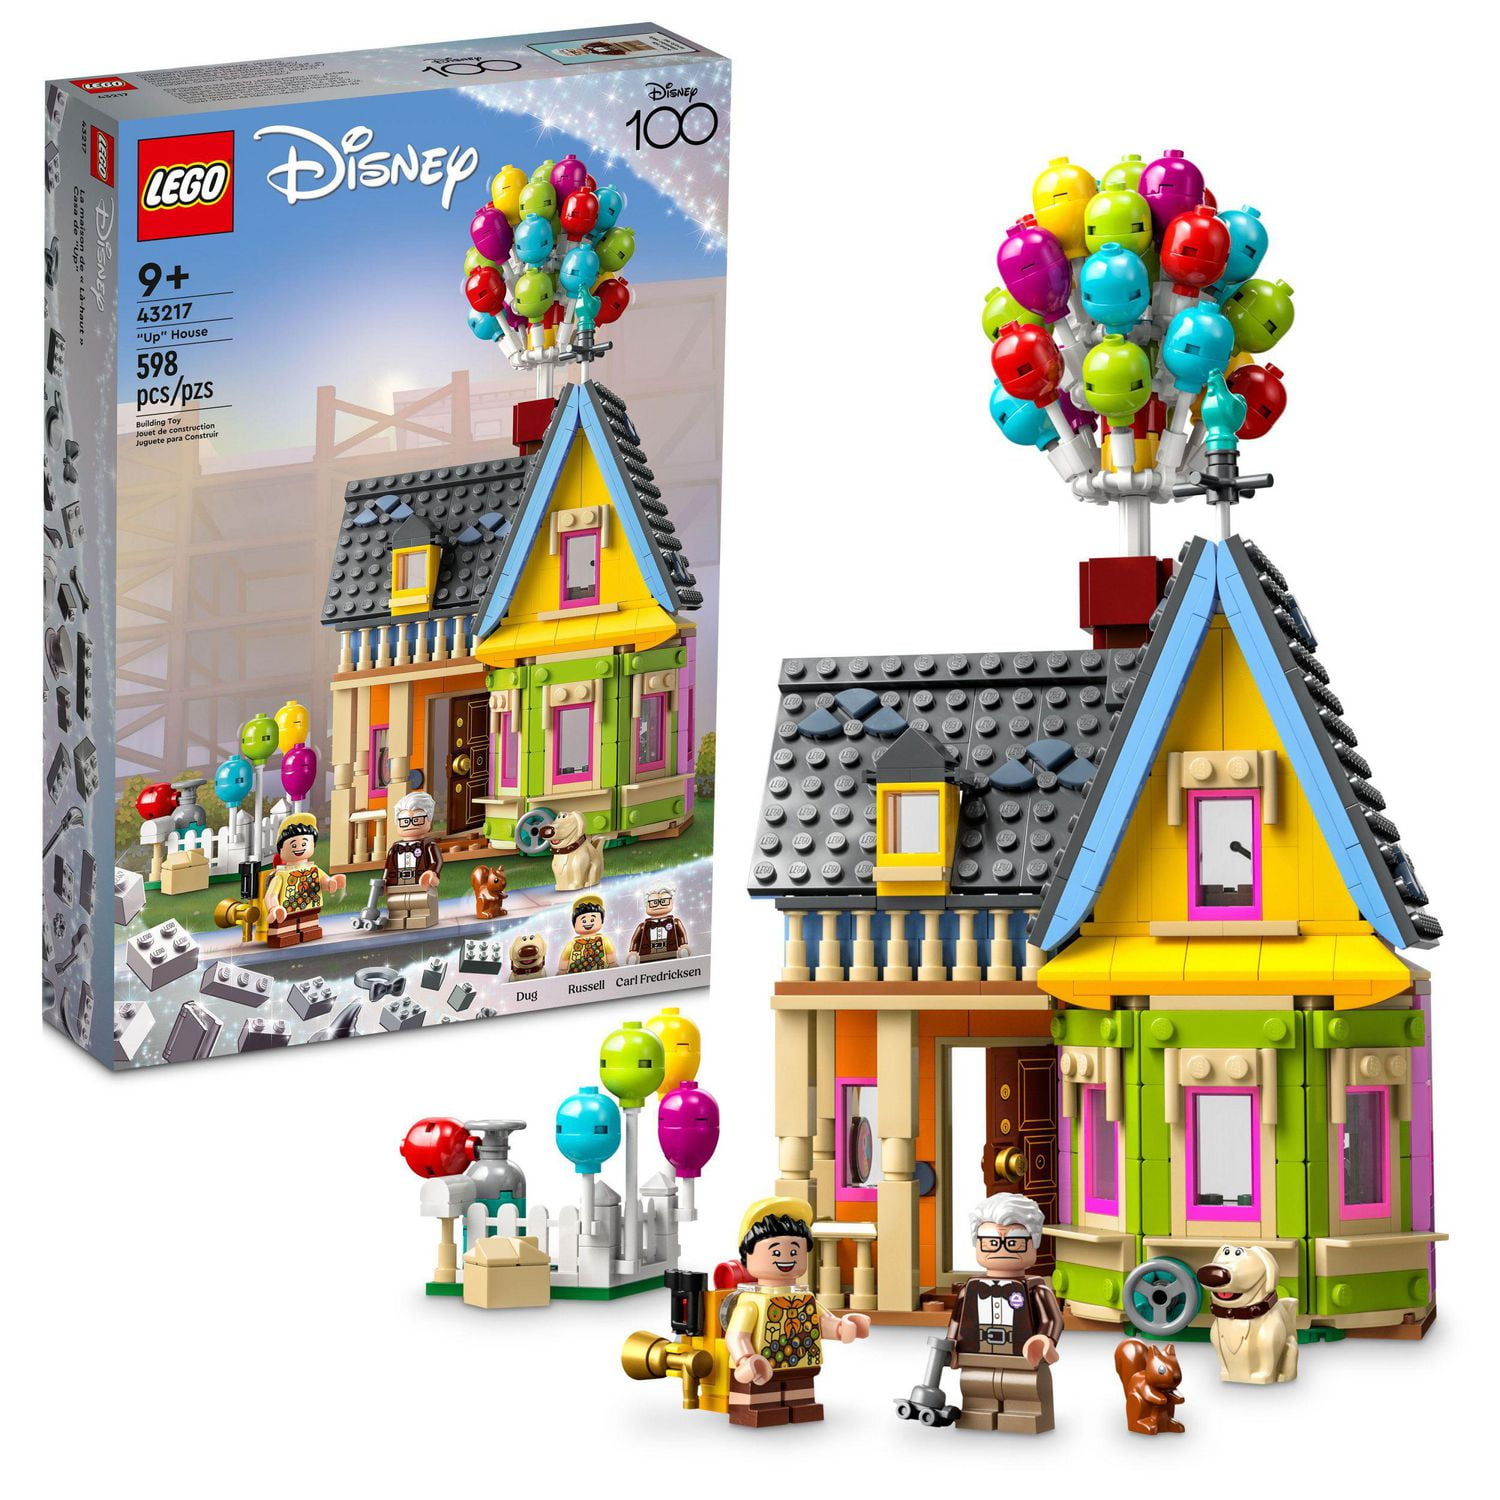 LEGO Sets 20% off: Star Wars The Mandalorian's N-1 Starfighter 75325, Star Wars Spider Tank 75361 $39.99, Disney and Pixar ‘Up’ House $47.99, Ideas Tree House $199.99